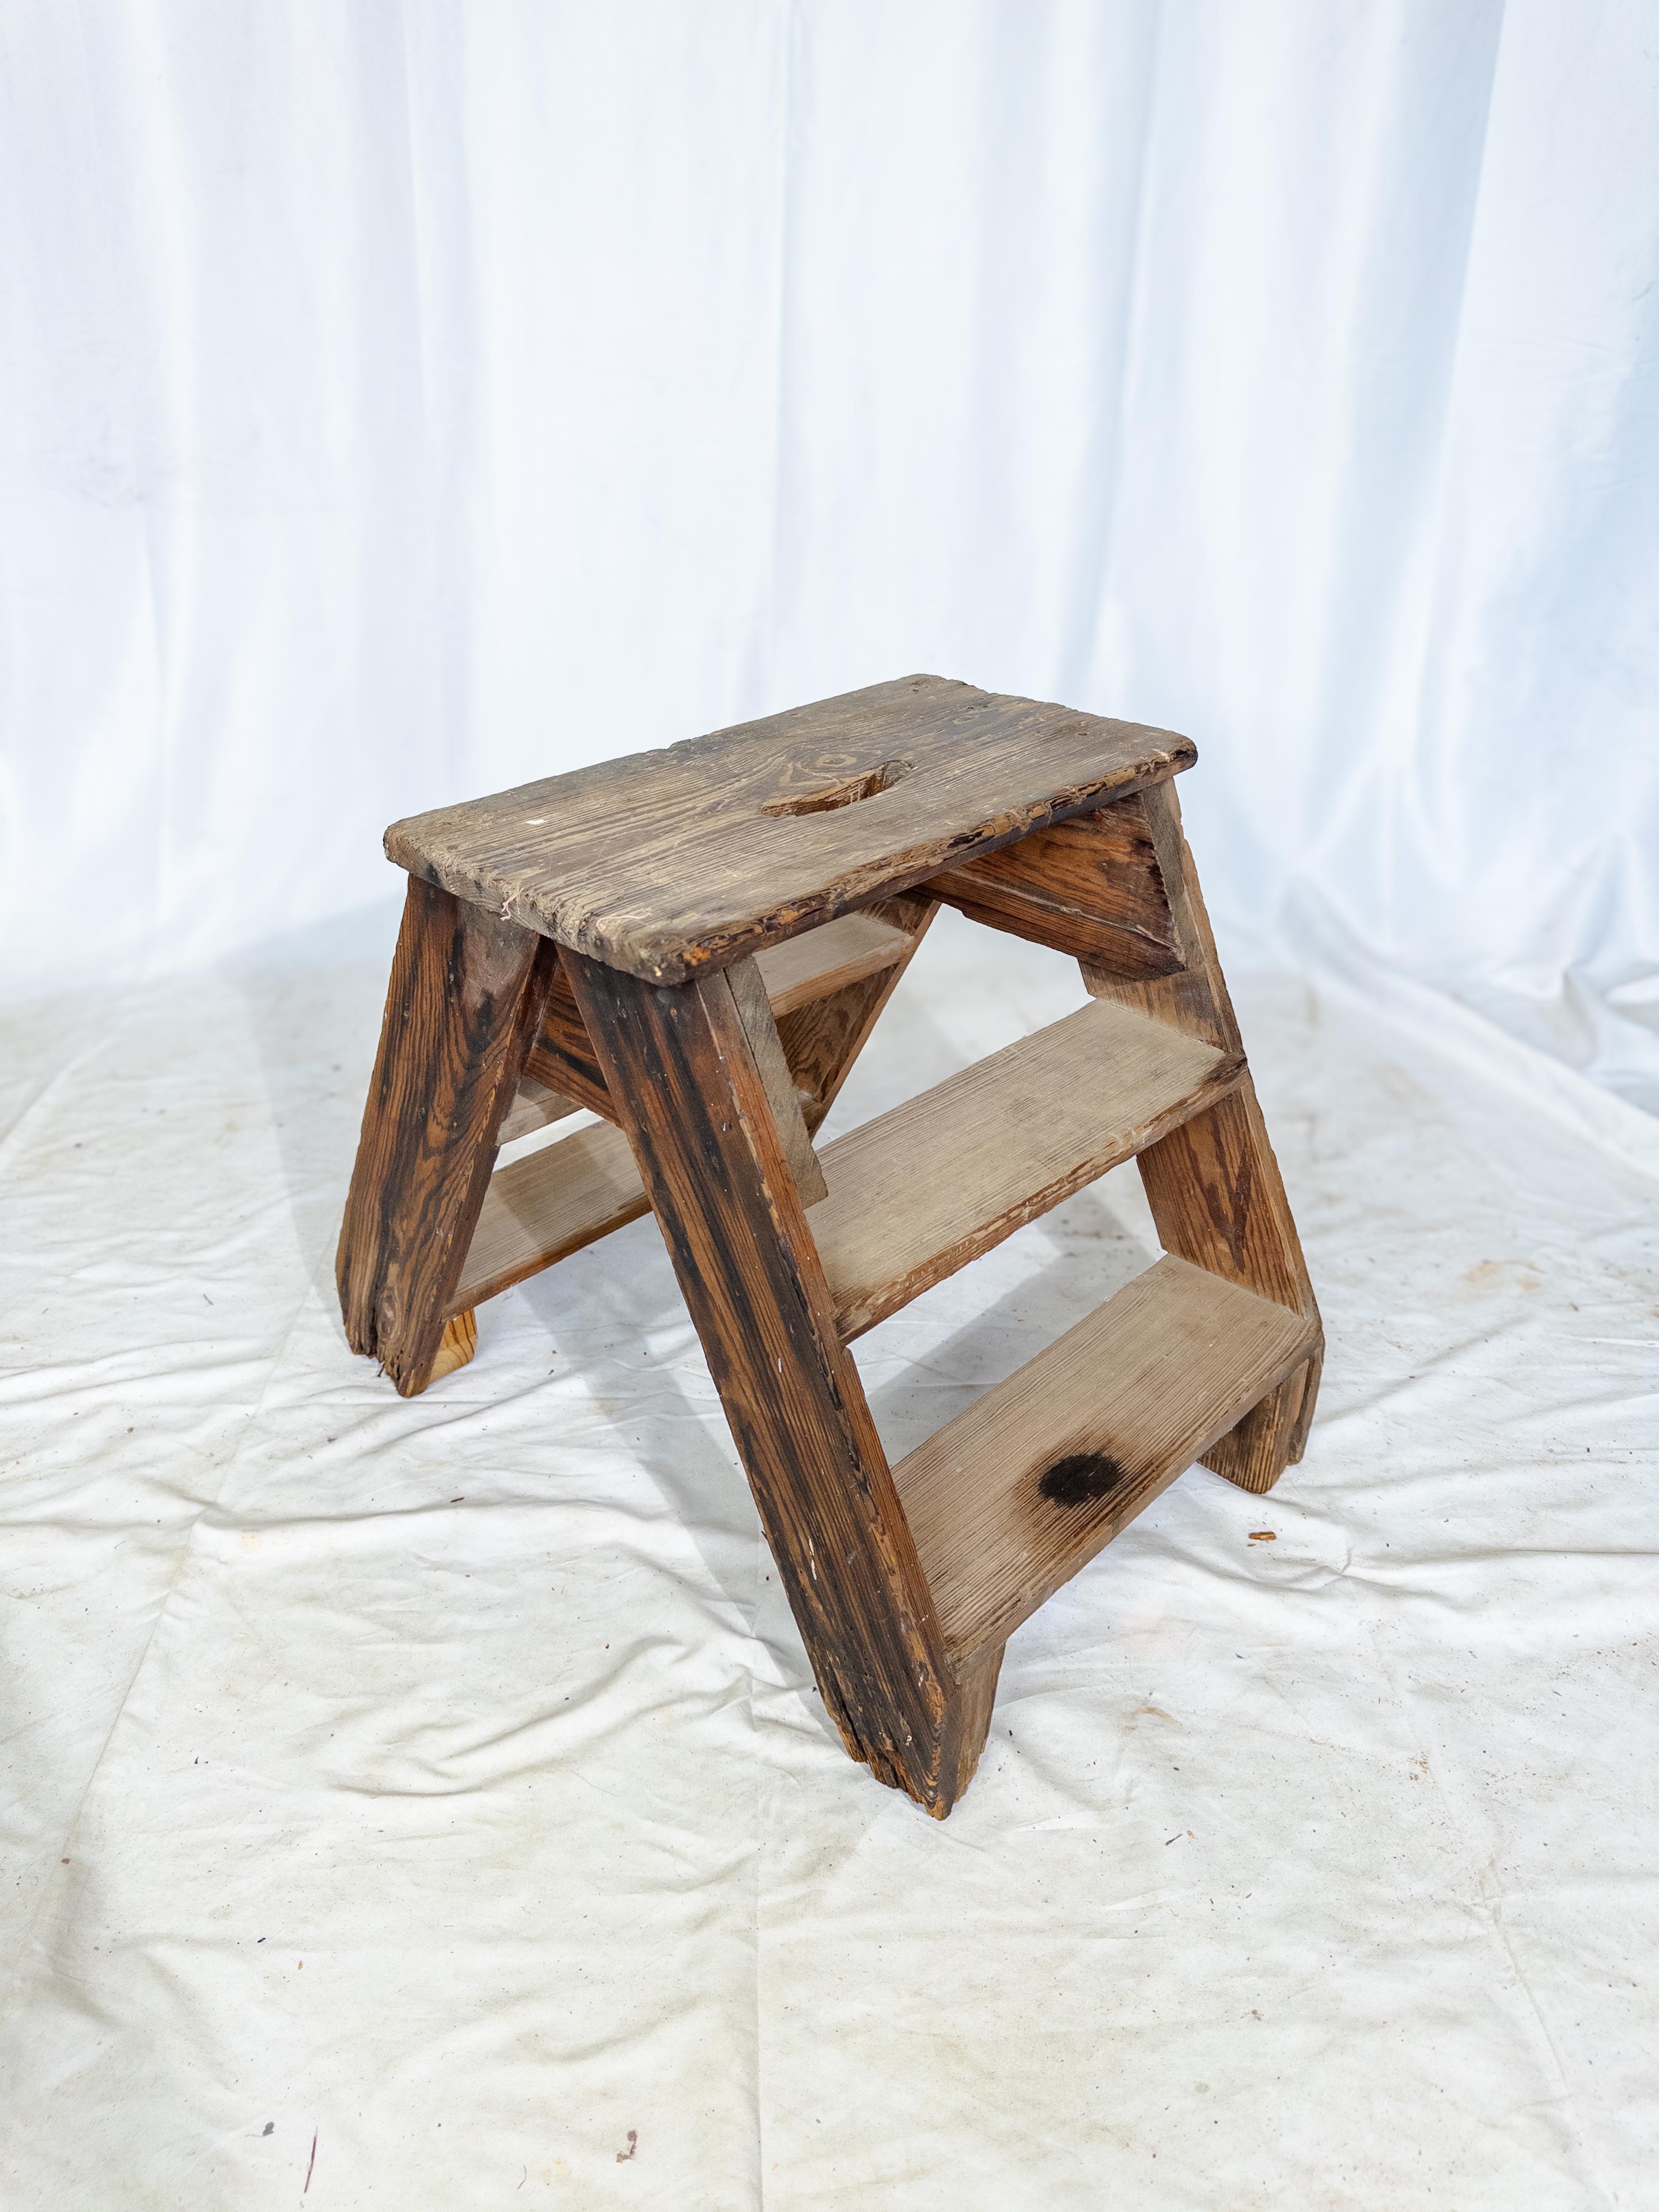 This antique step stool hails from the rugged shores of New England, embodying the enduring craftsmanship of the region. Carved from sturdy wood, it stands as a humble yet essential piece of household furniture, reflecting the practical